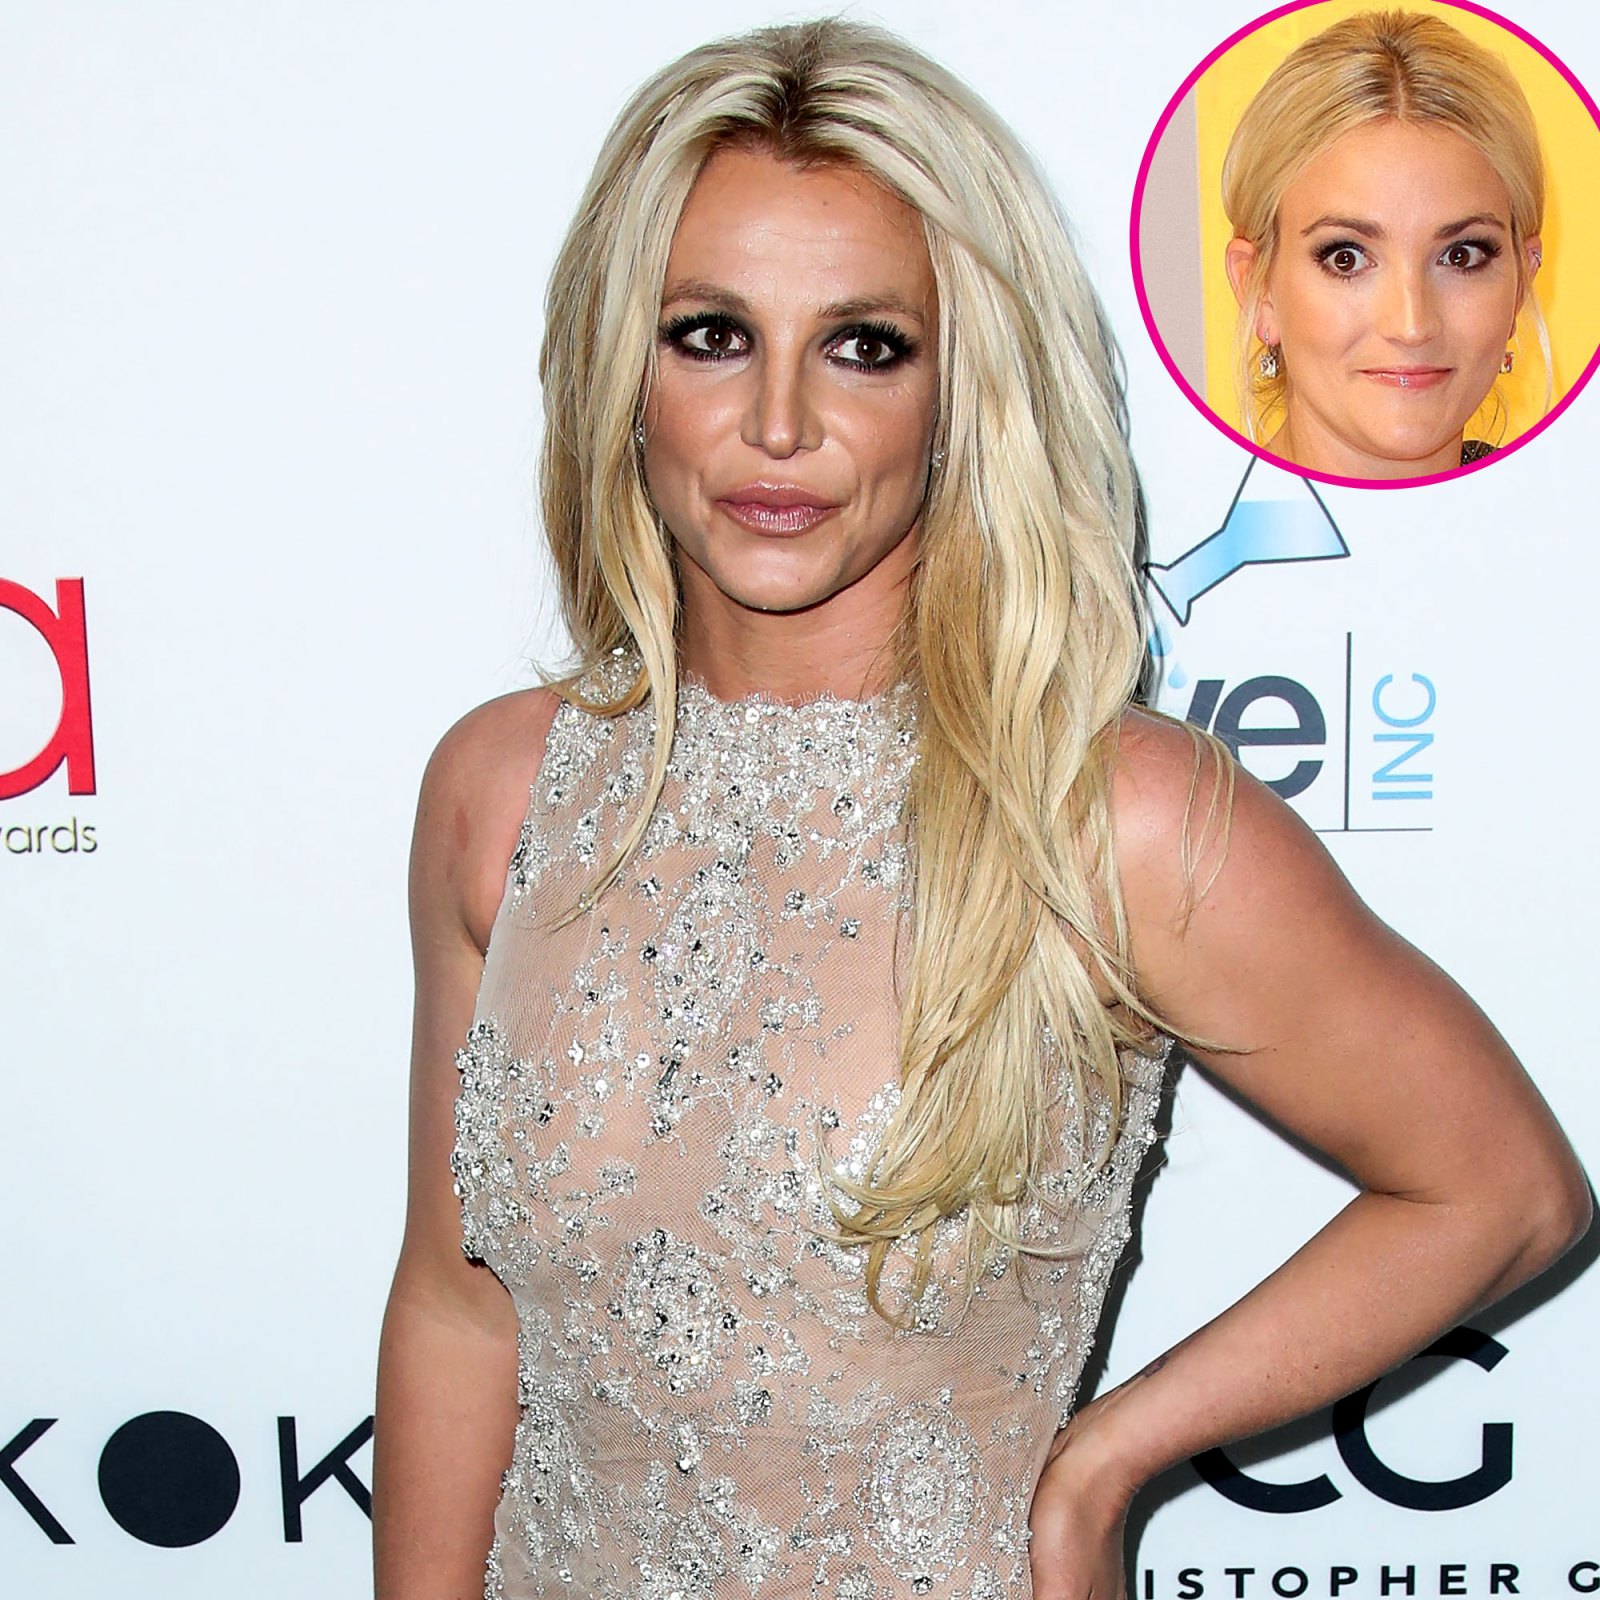 Betrayed' Britney Spears 'Will Hold Nothing Back' in Upcoming Memoir